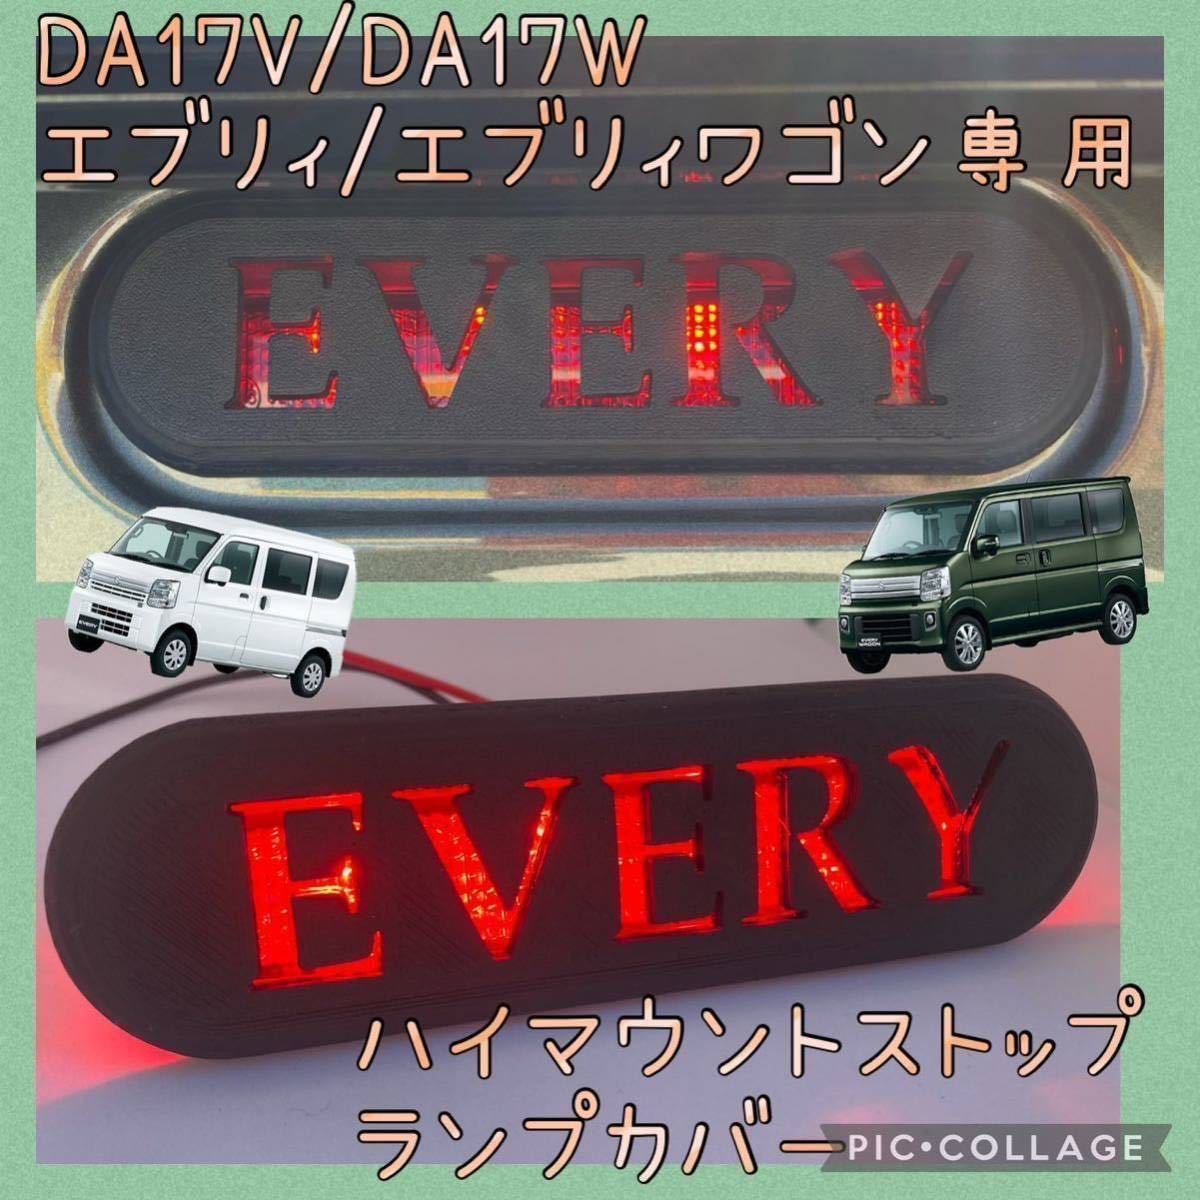 DA17W/DA17V Every / Every Wagon exclusive use EVERY character high-mount stoplamp cover complete original goods C3